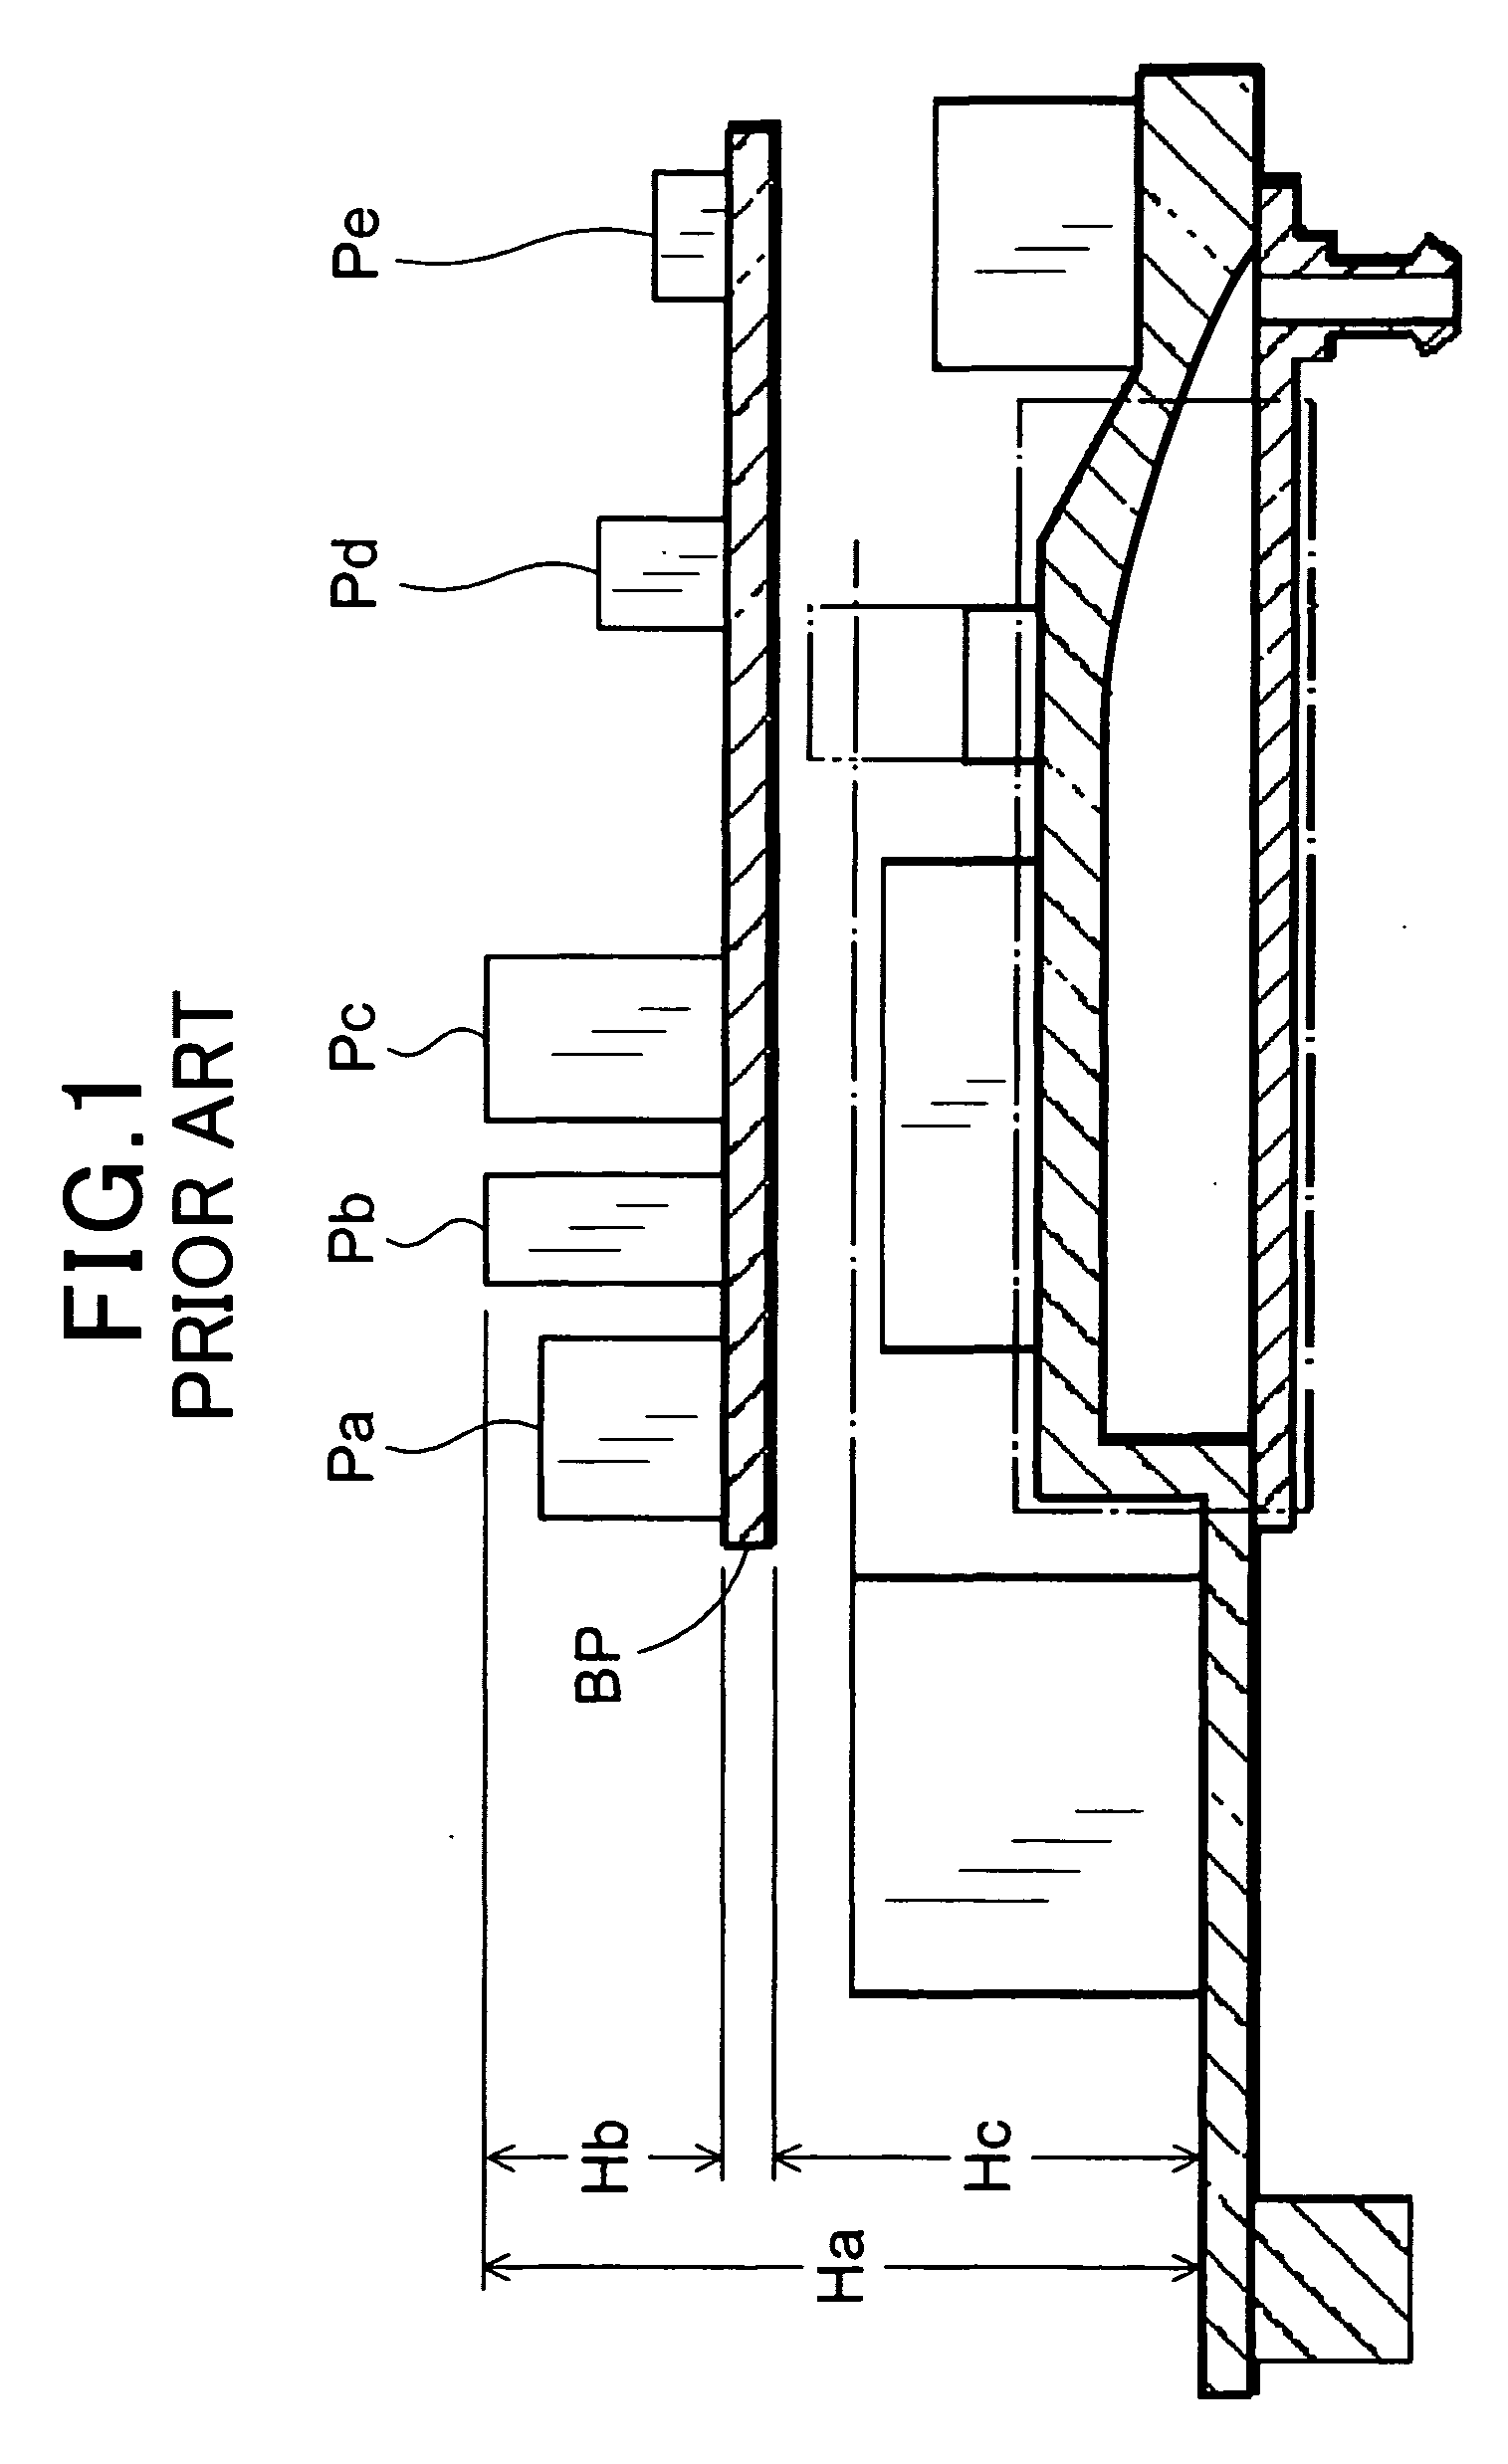 Power supply unit using  housing in which printed circuit board is housed